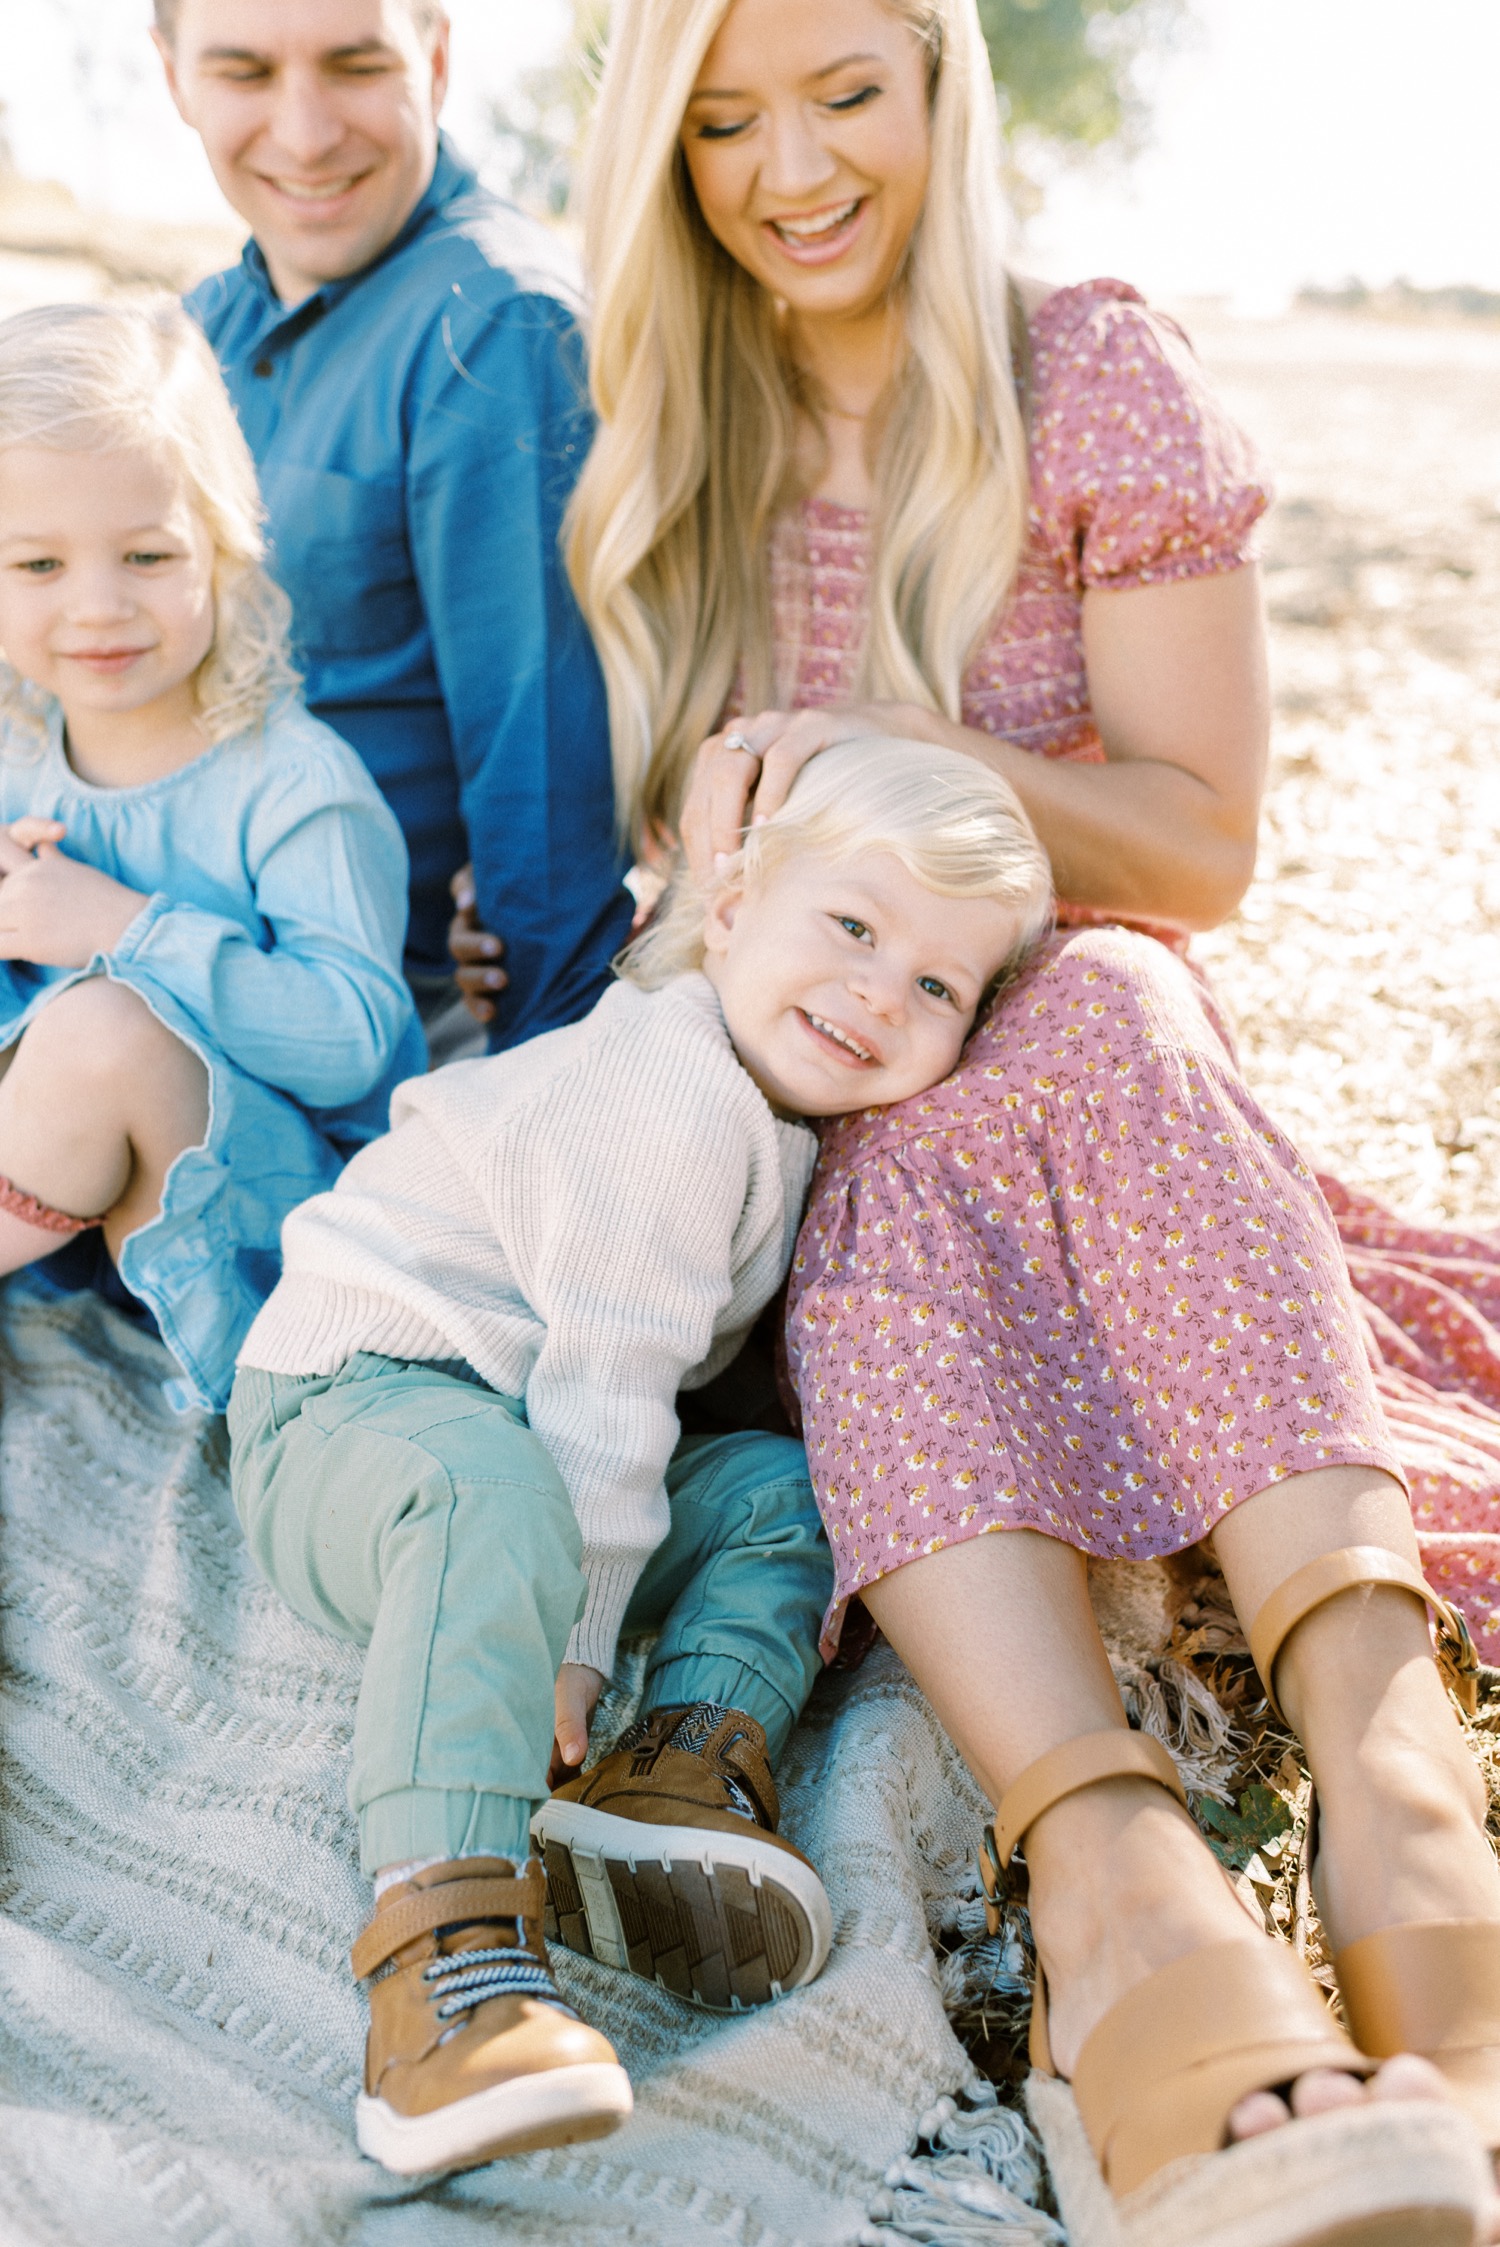 8 tips for a picture perfect family shoot - Showit Blog